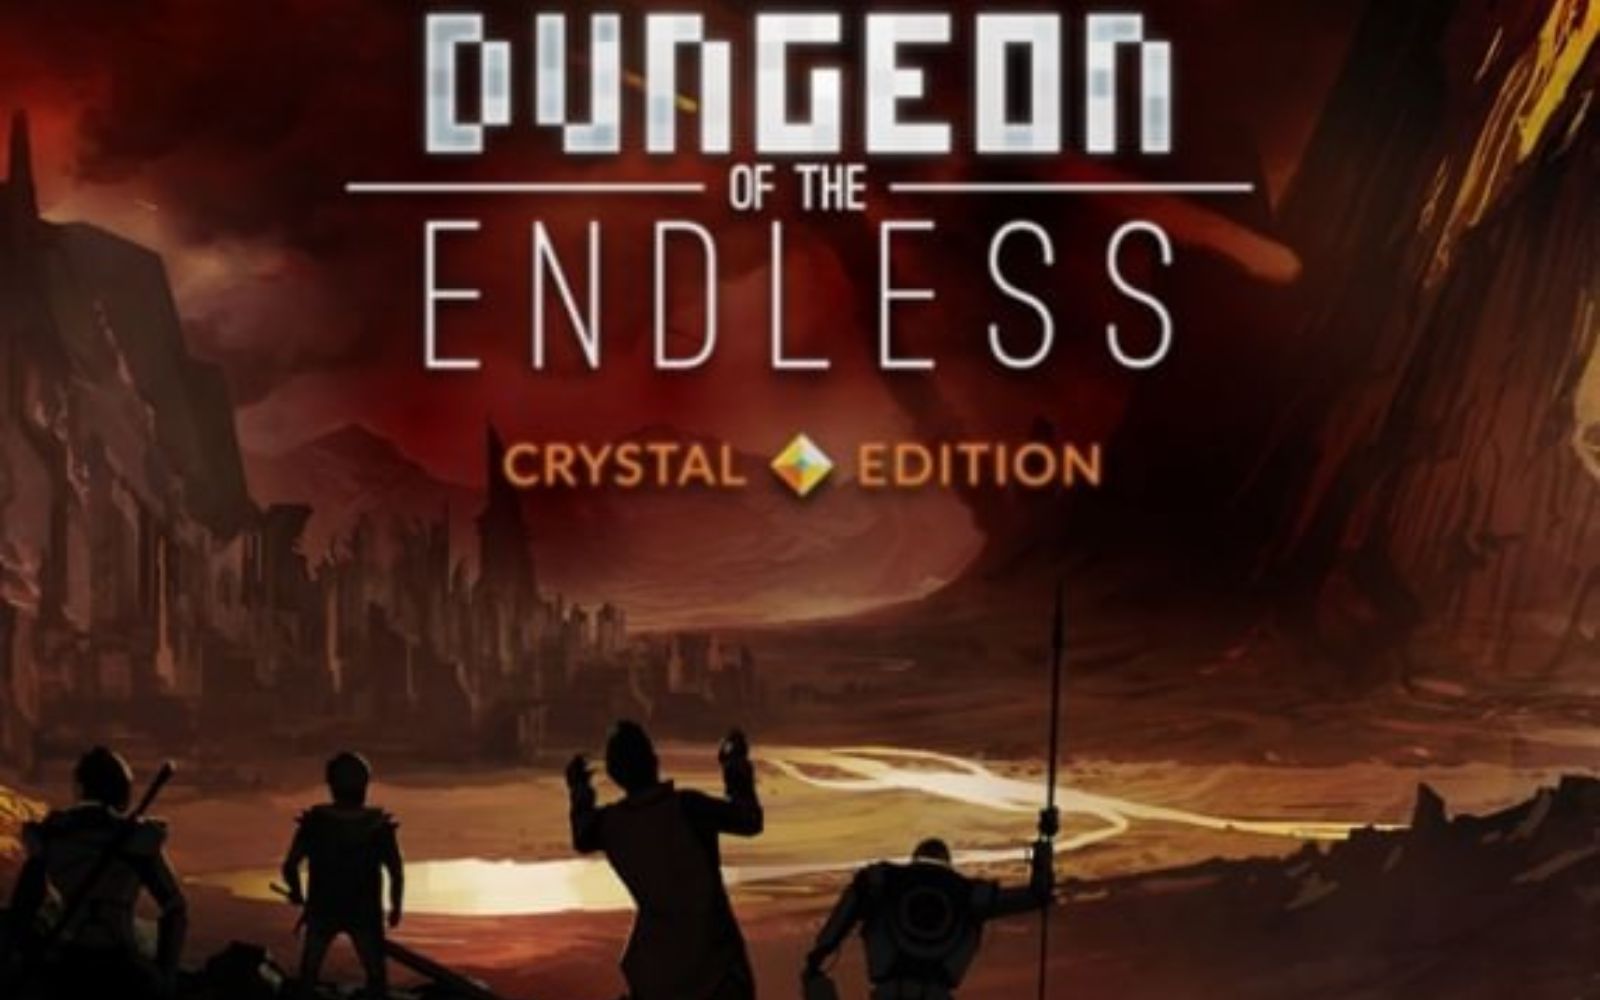 Dungeon of the Endless - Crystal Edition